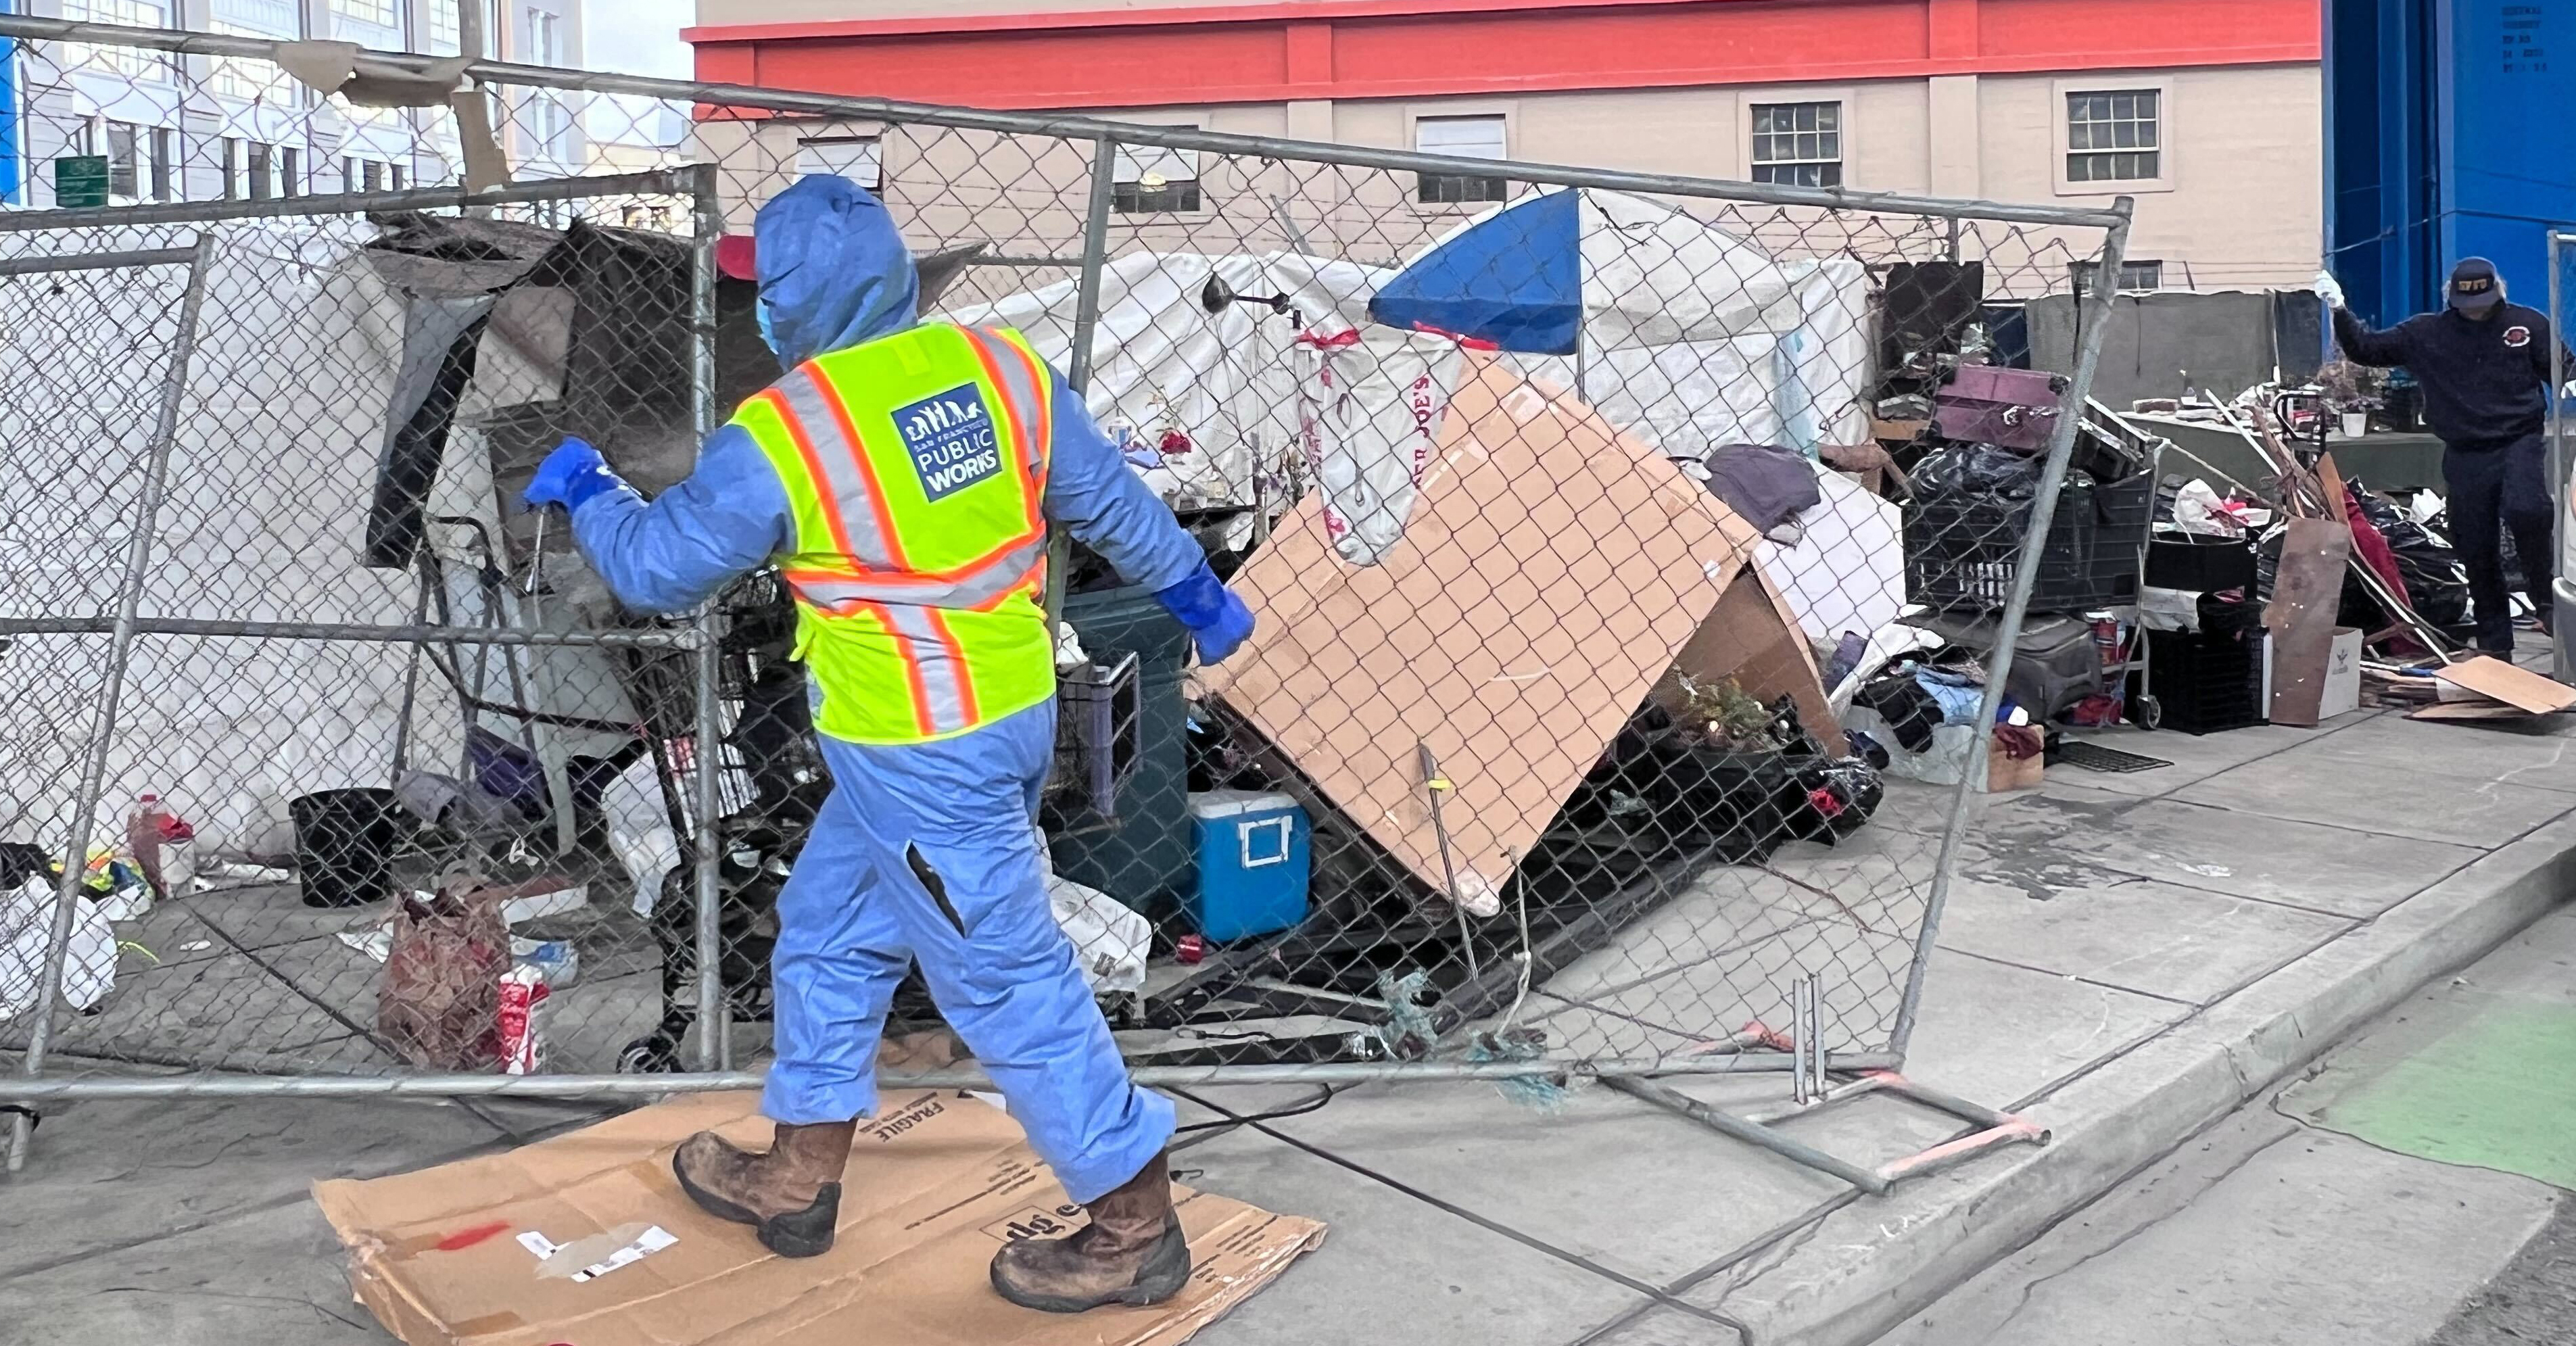 San Francisco accused of failing to train workers who clear homeless camps